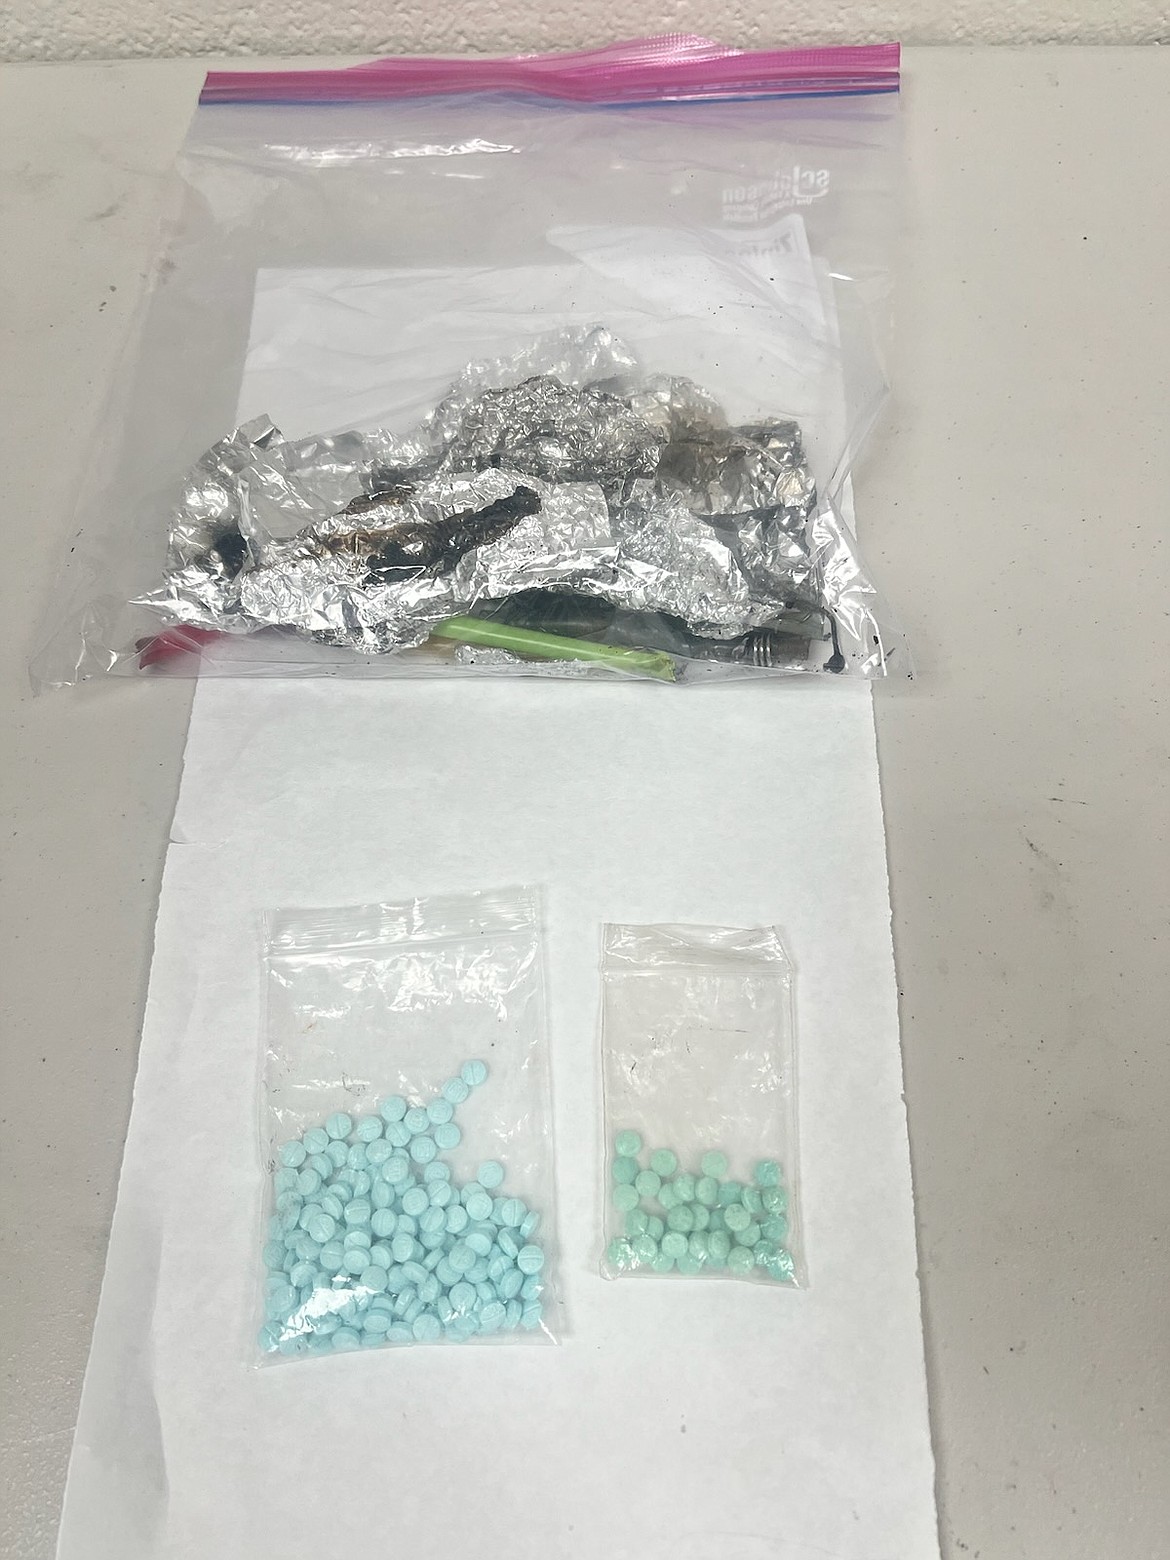 Packages of fentanyl pills confiscated by sheriff's deputies from a Spokane woman arrested Sunday in Athol.